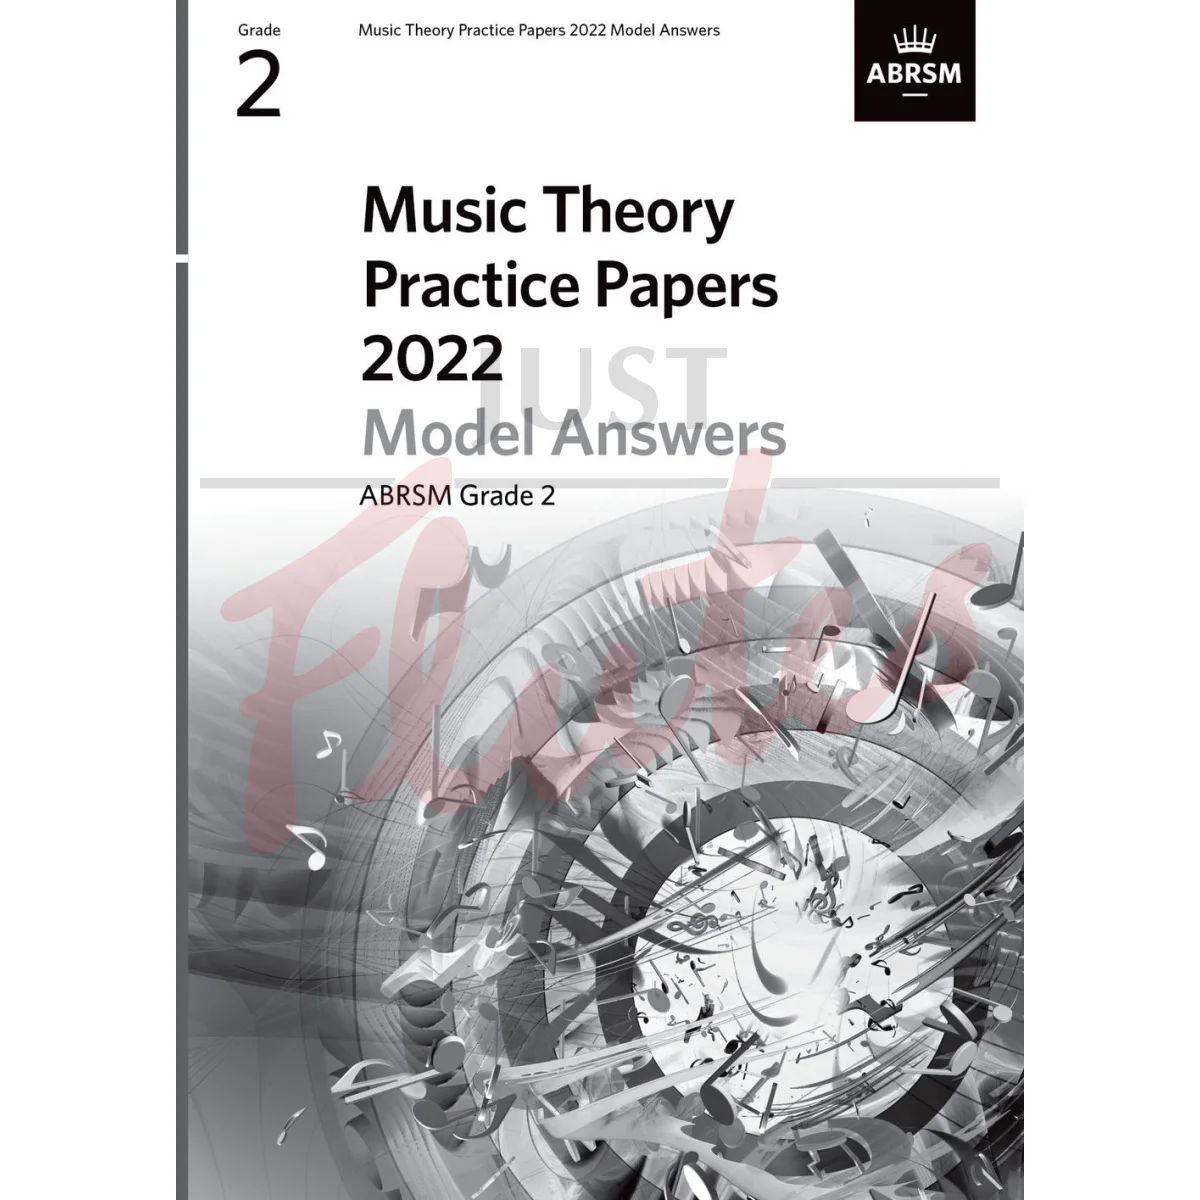 Music Theory Practice Papers 2022 Grade 2 - Model Answers